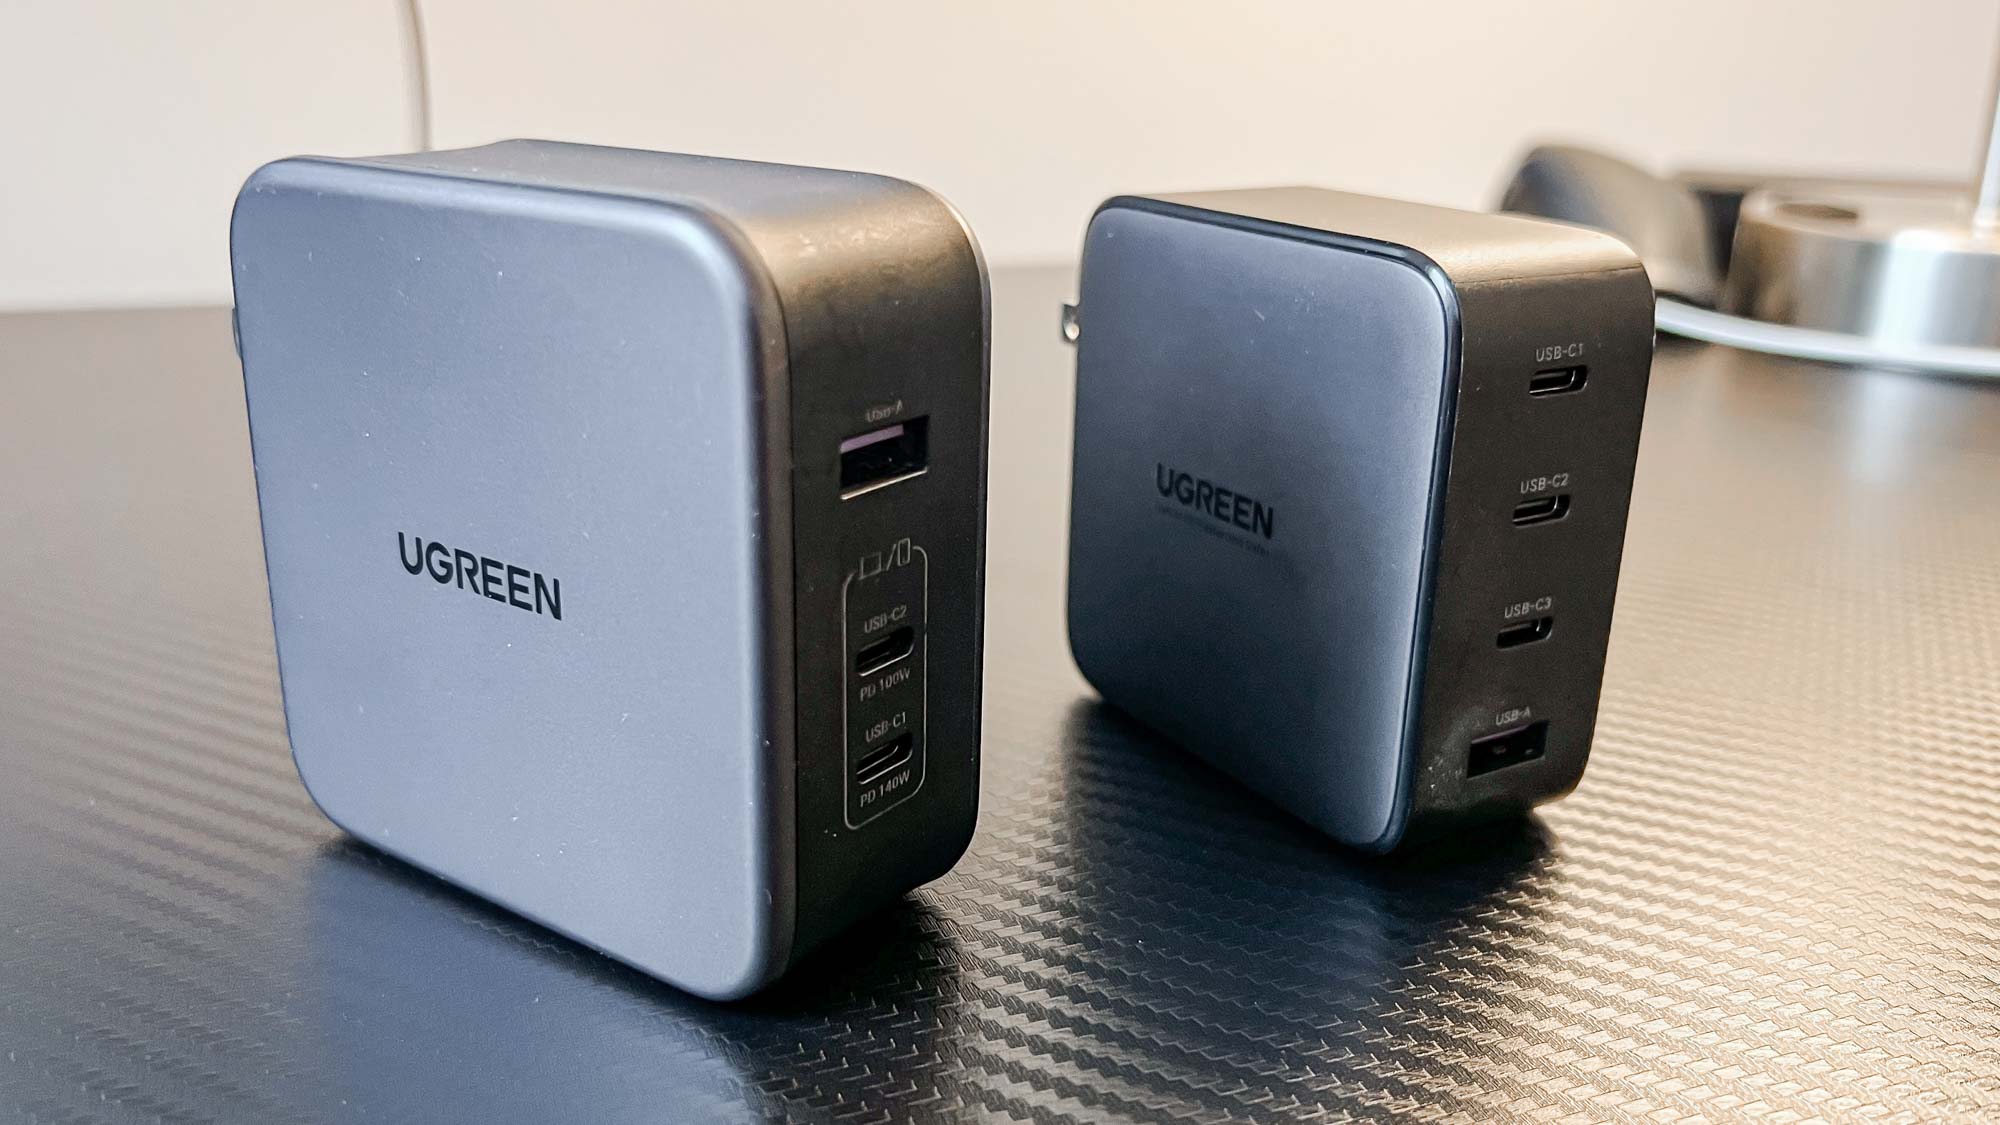 UGREEN 100W GaN Fast Charger Can Charge MacBook, iPhone, iPad And Watch At  The Same Time - iOS Hacker